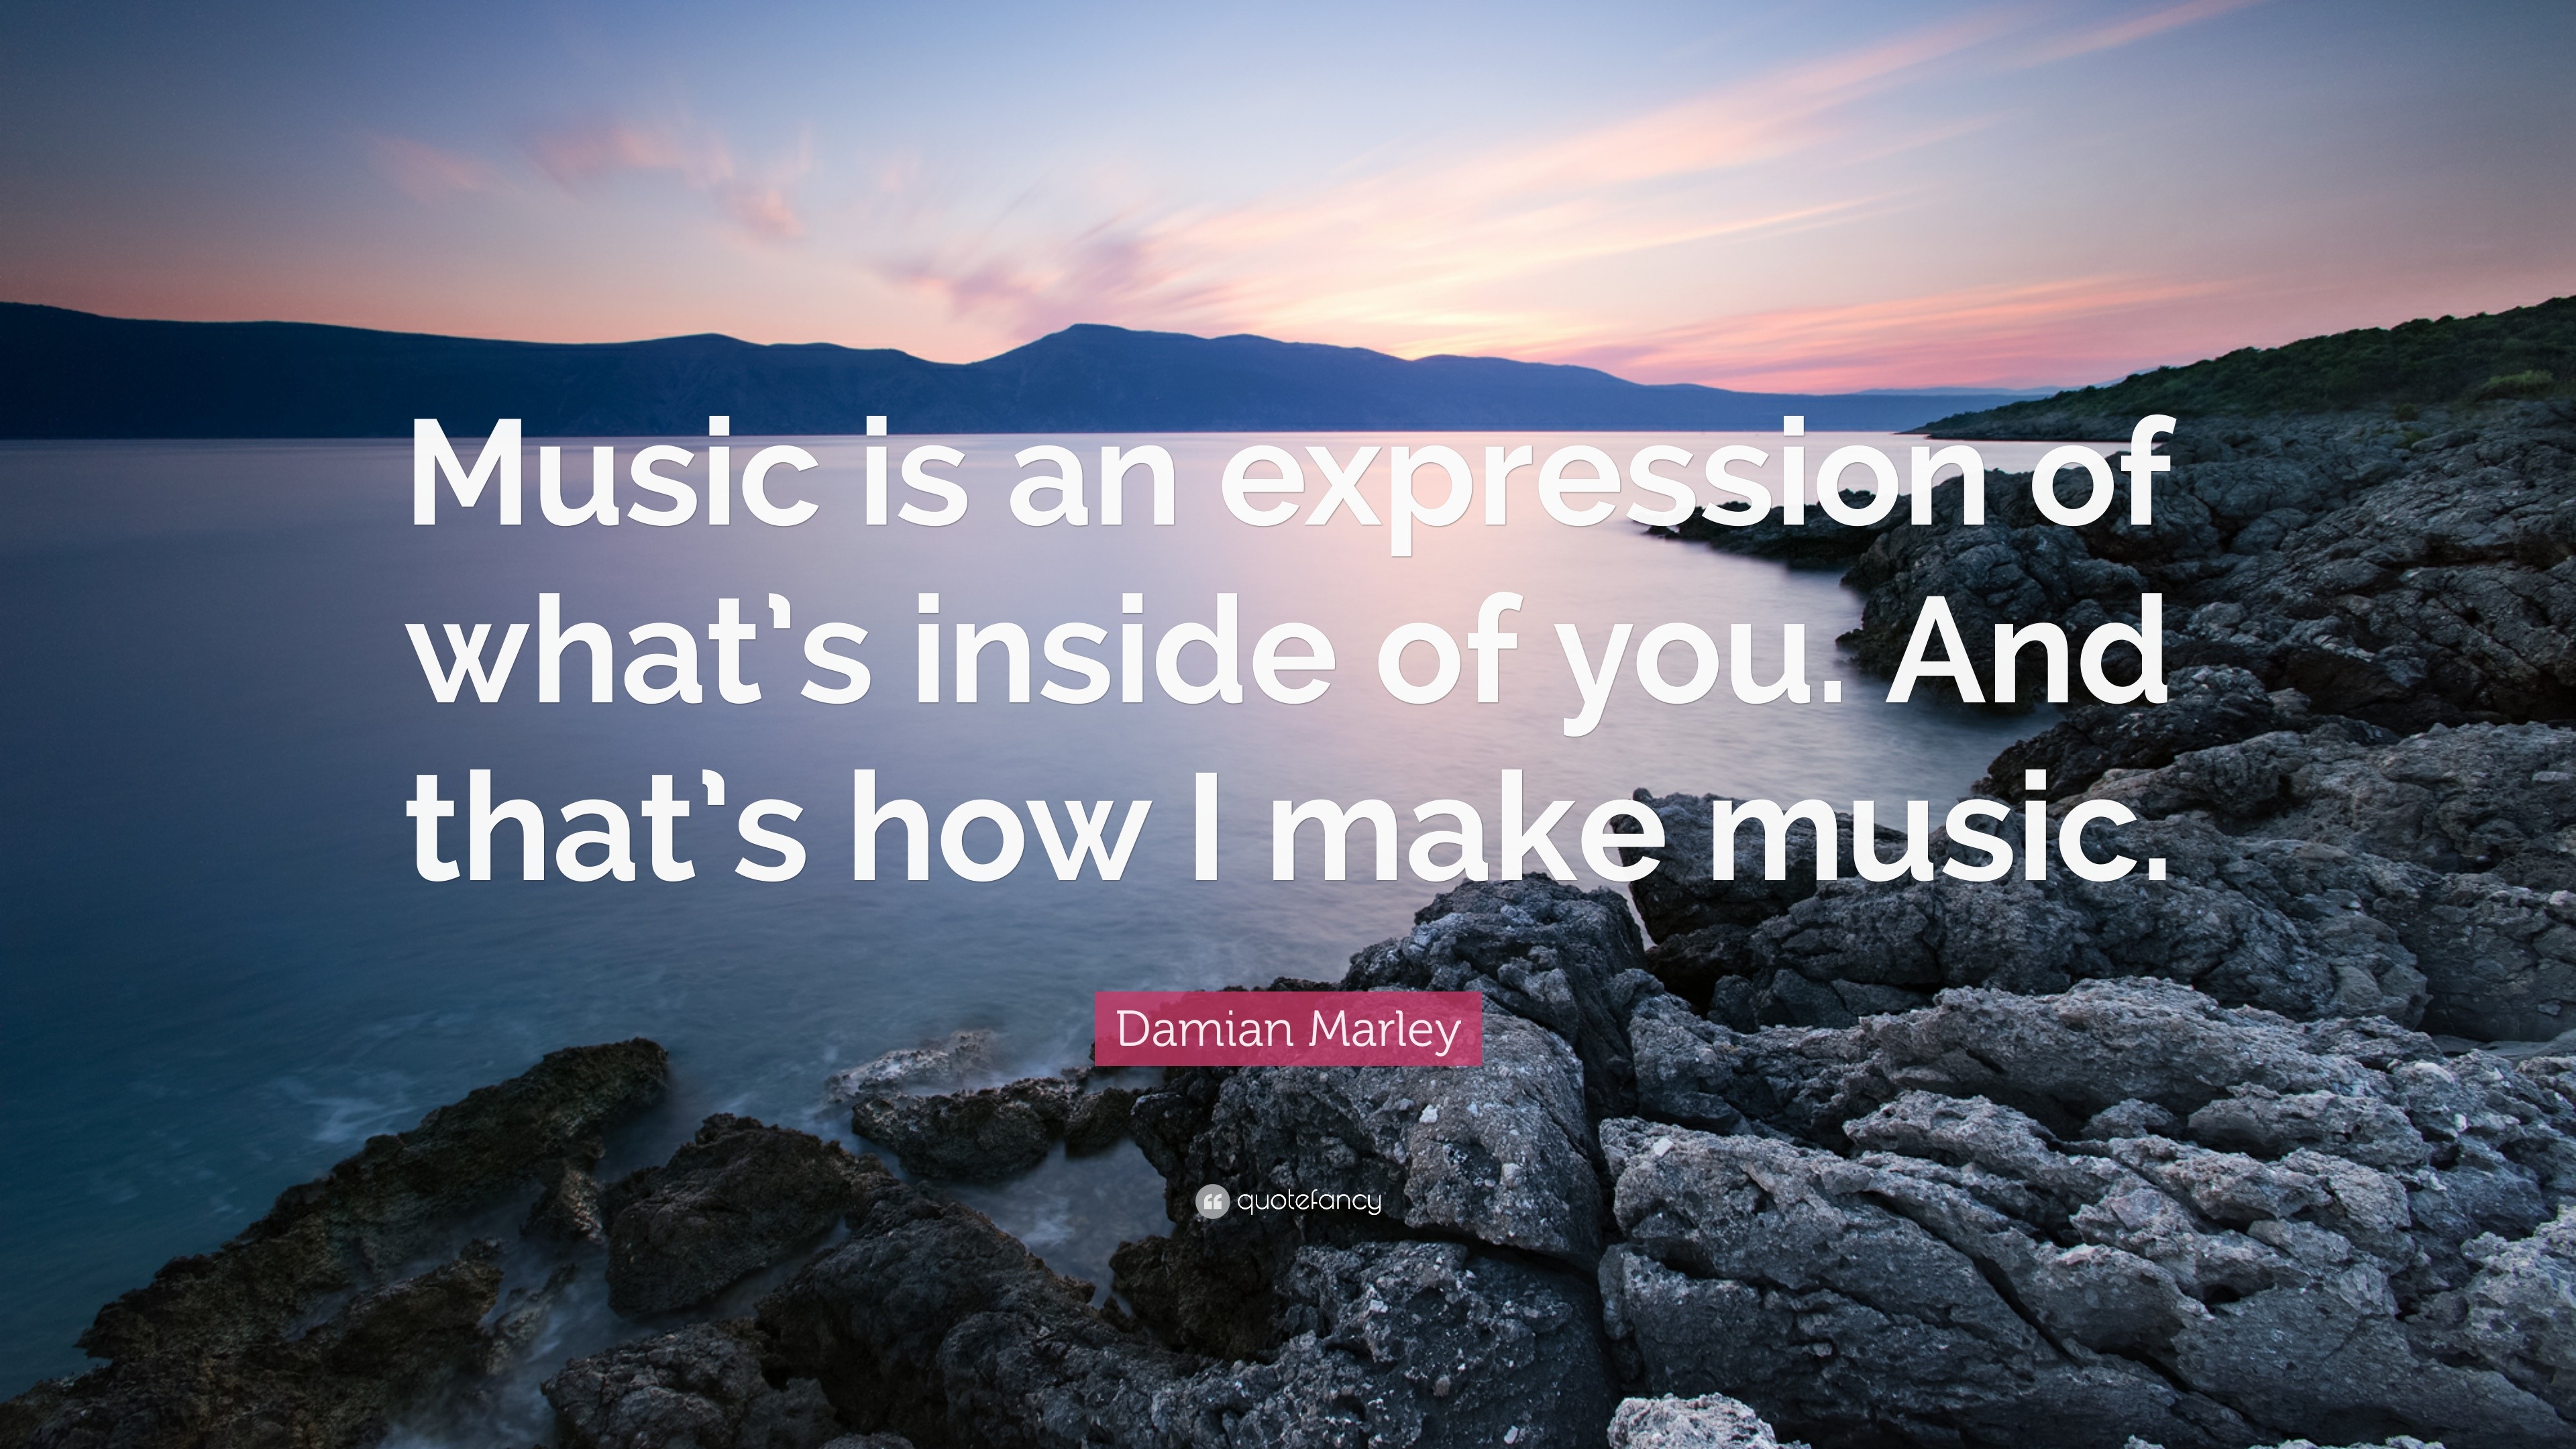 Damian Marley Quote: "Music is an expression of what's inside of you. And that's how I make ...